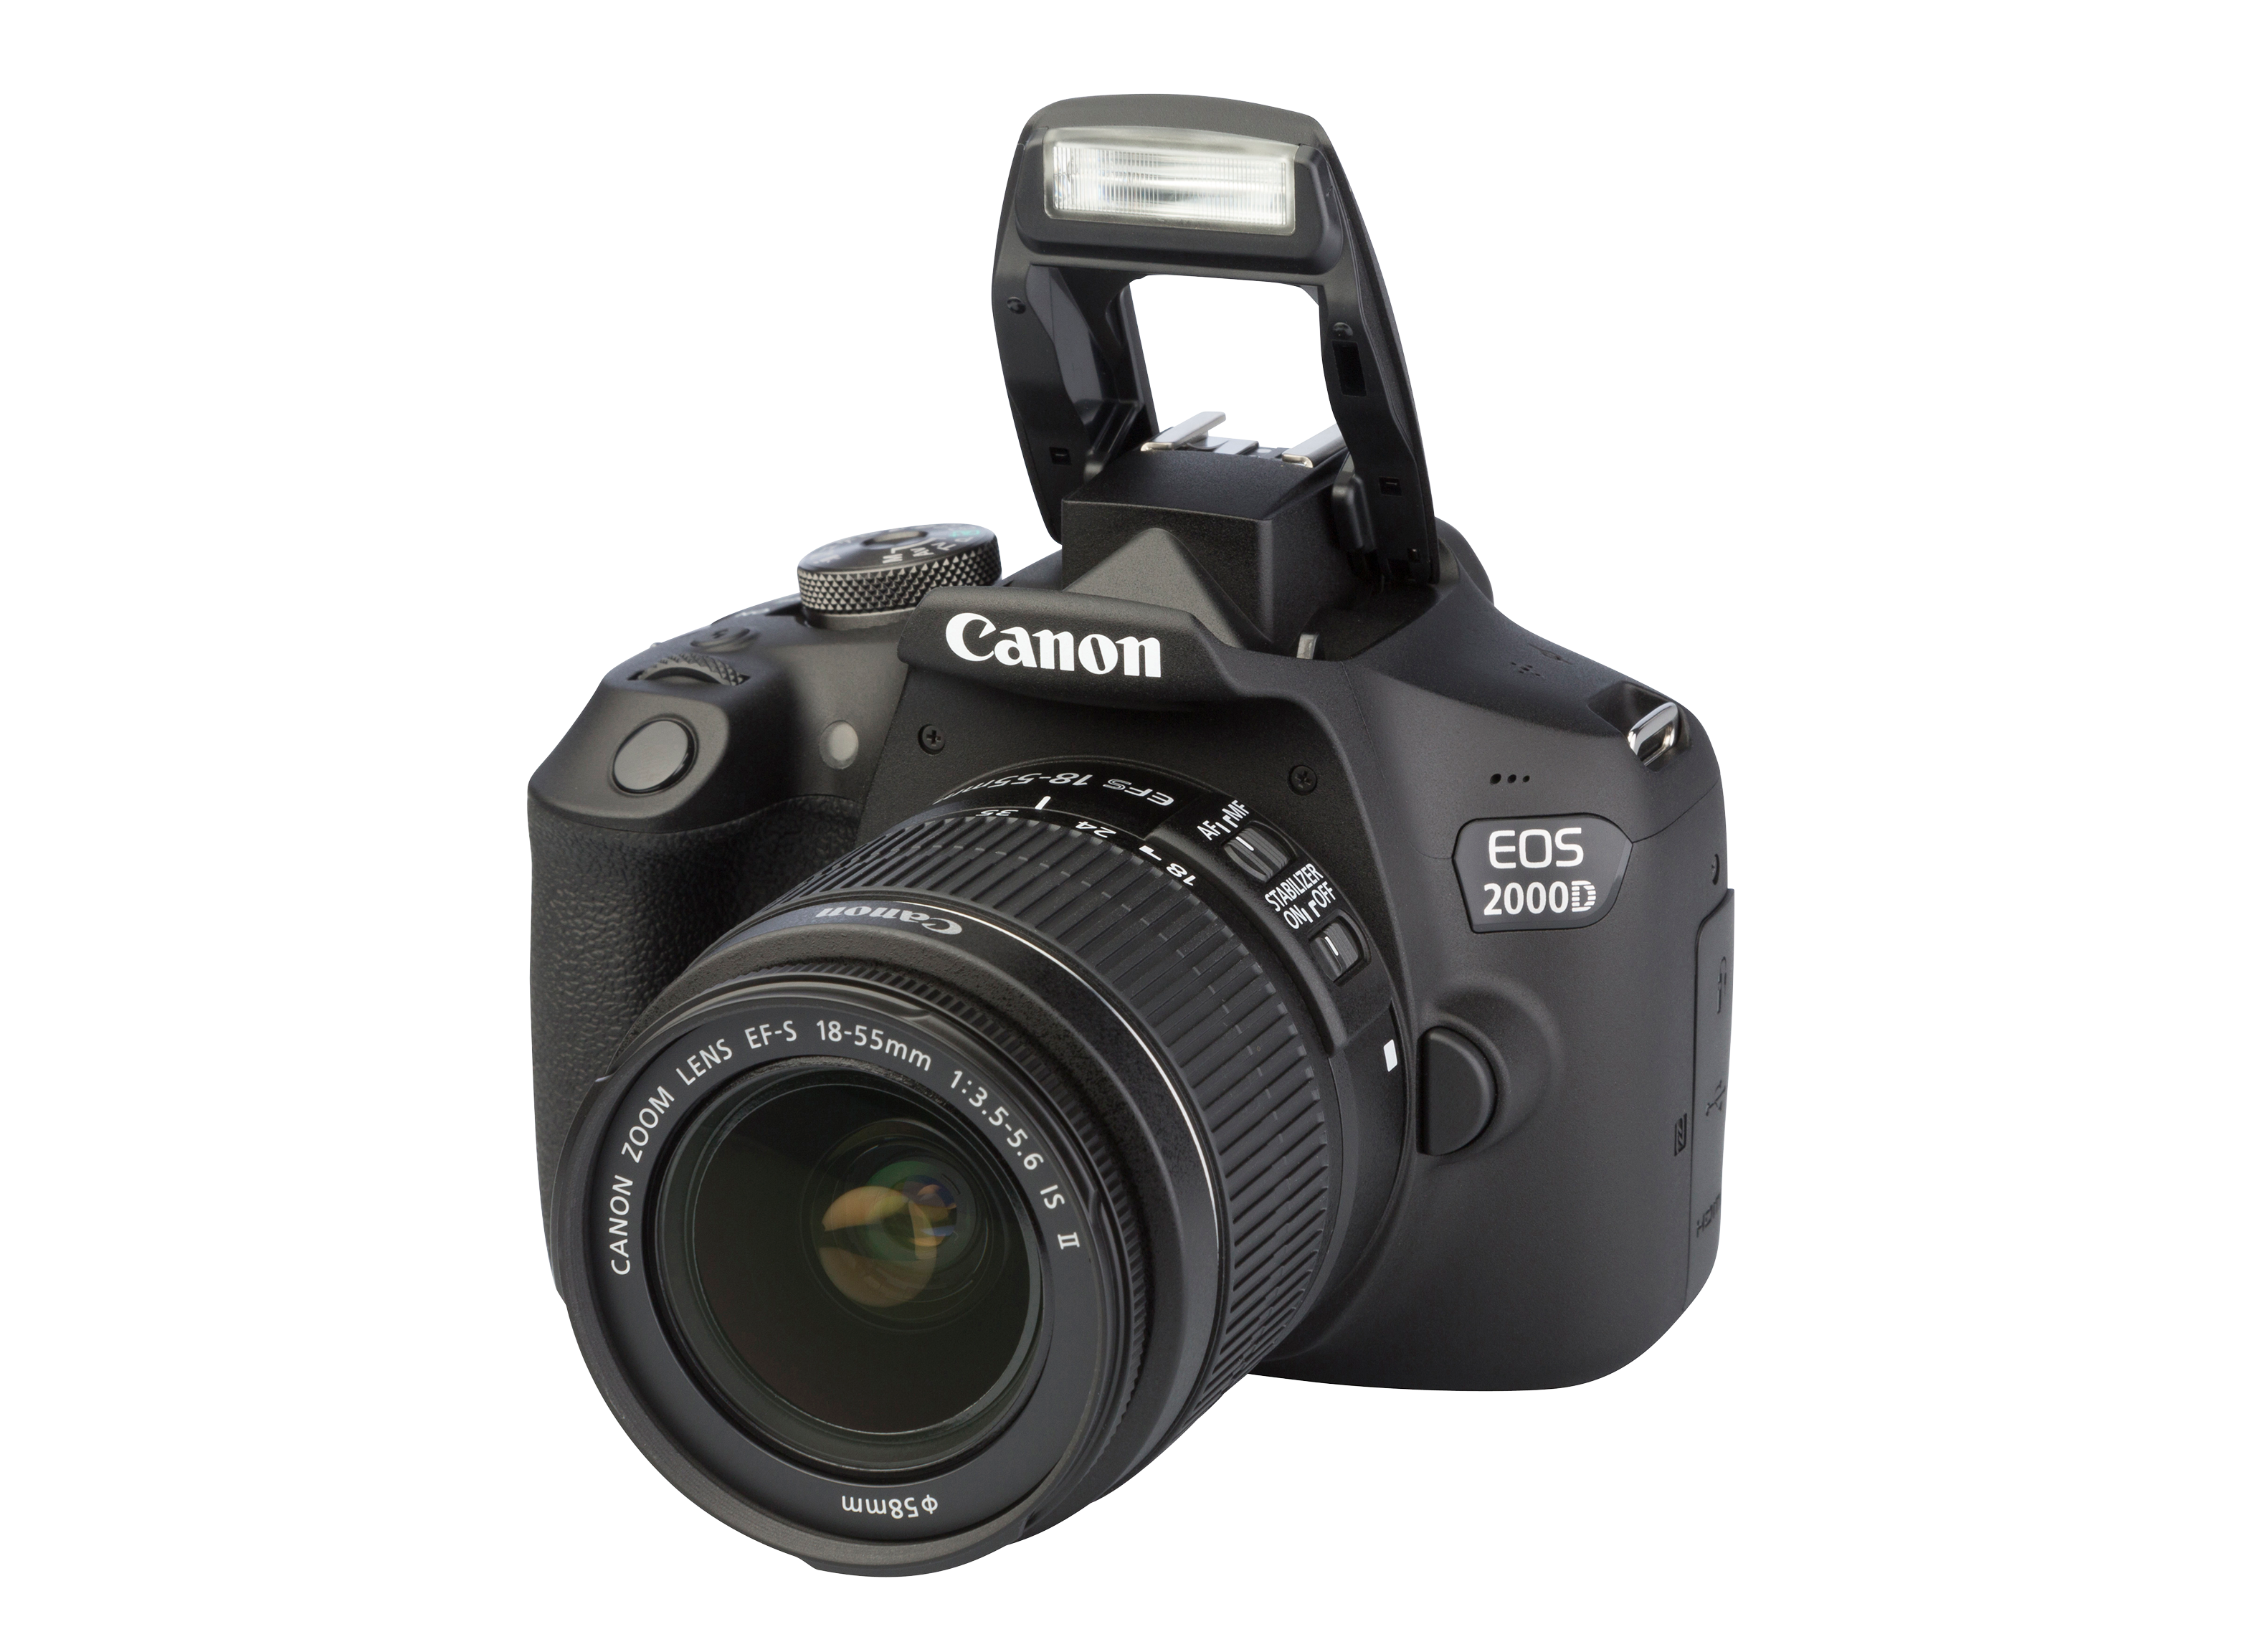 Canon EOS 2000D (Rebel T7) Camera Review: A Beginners Camera